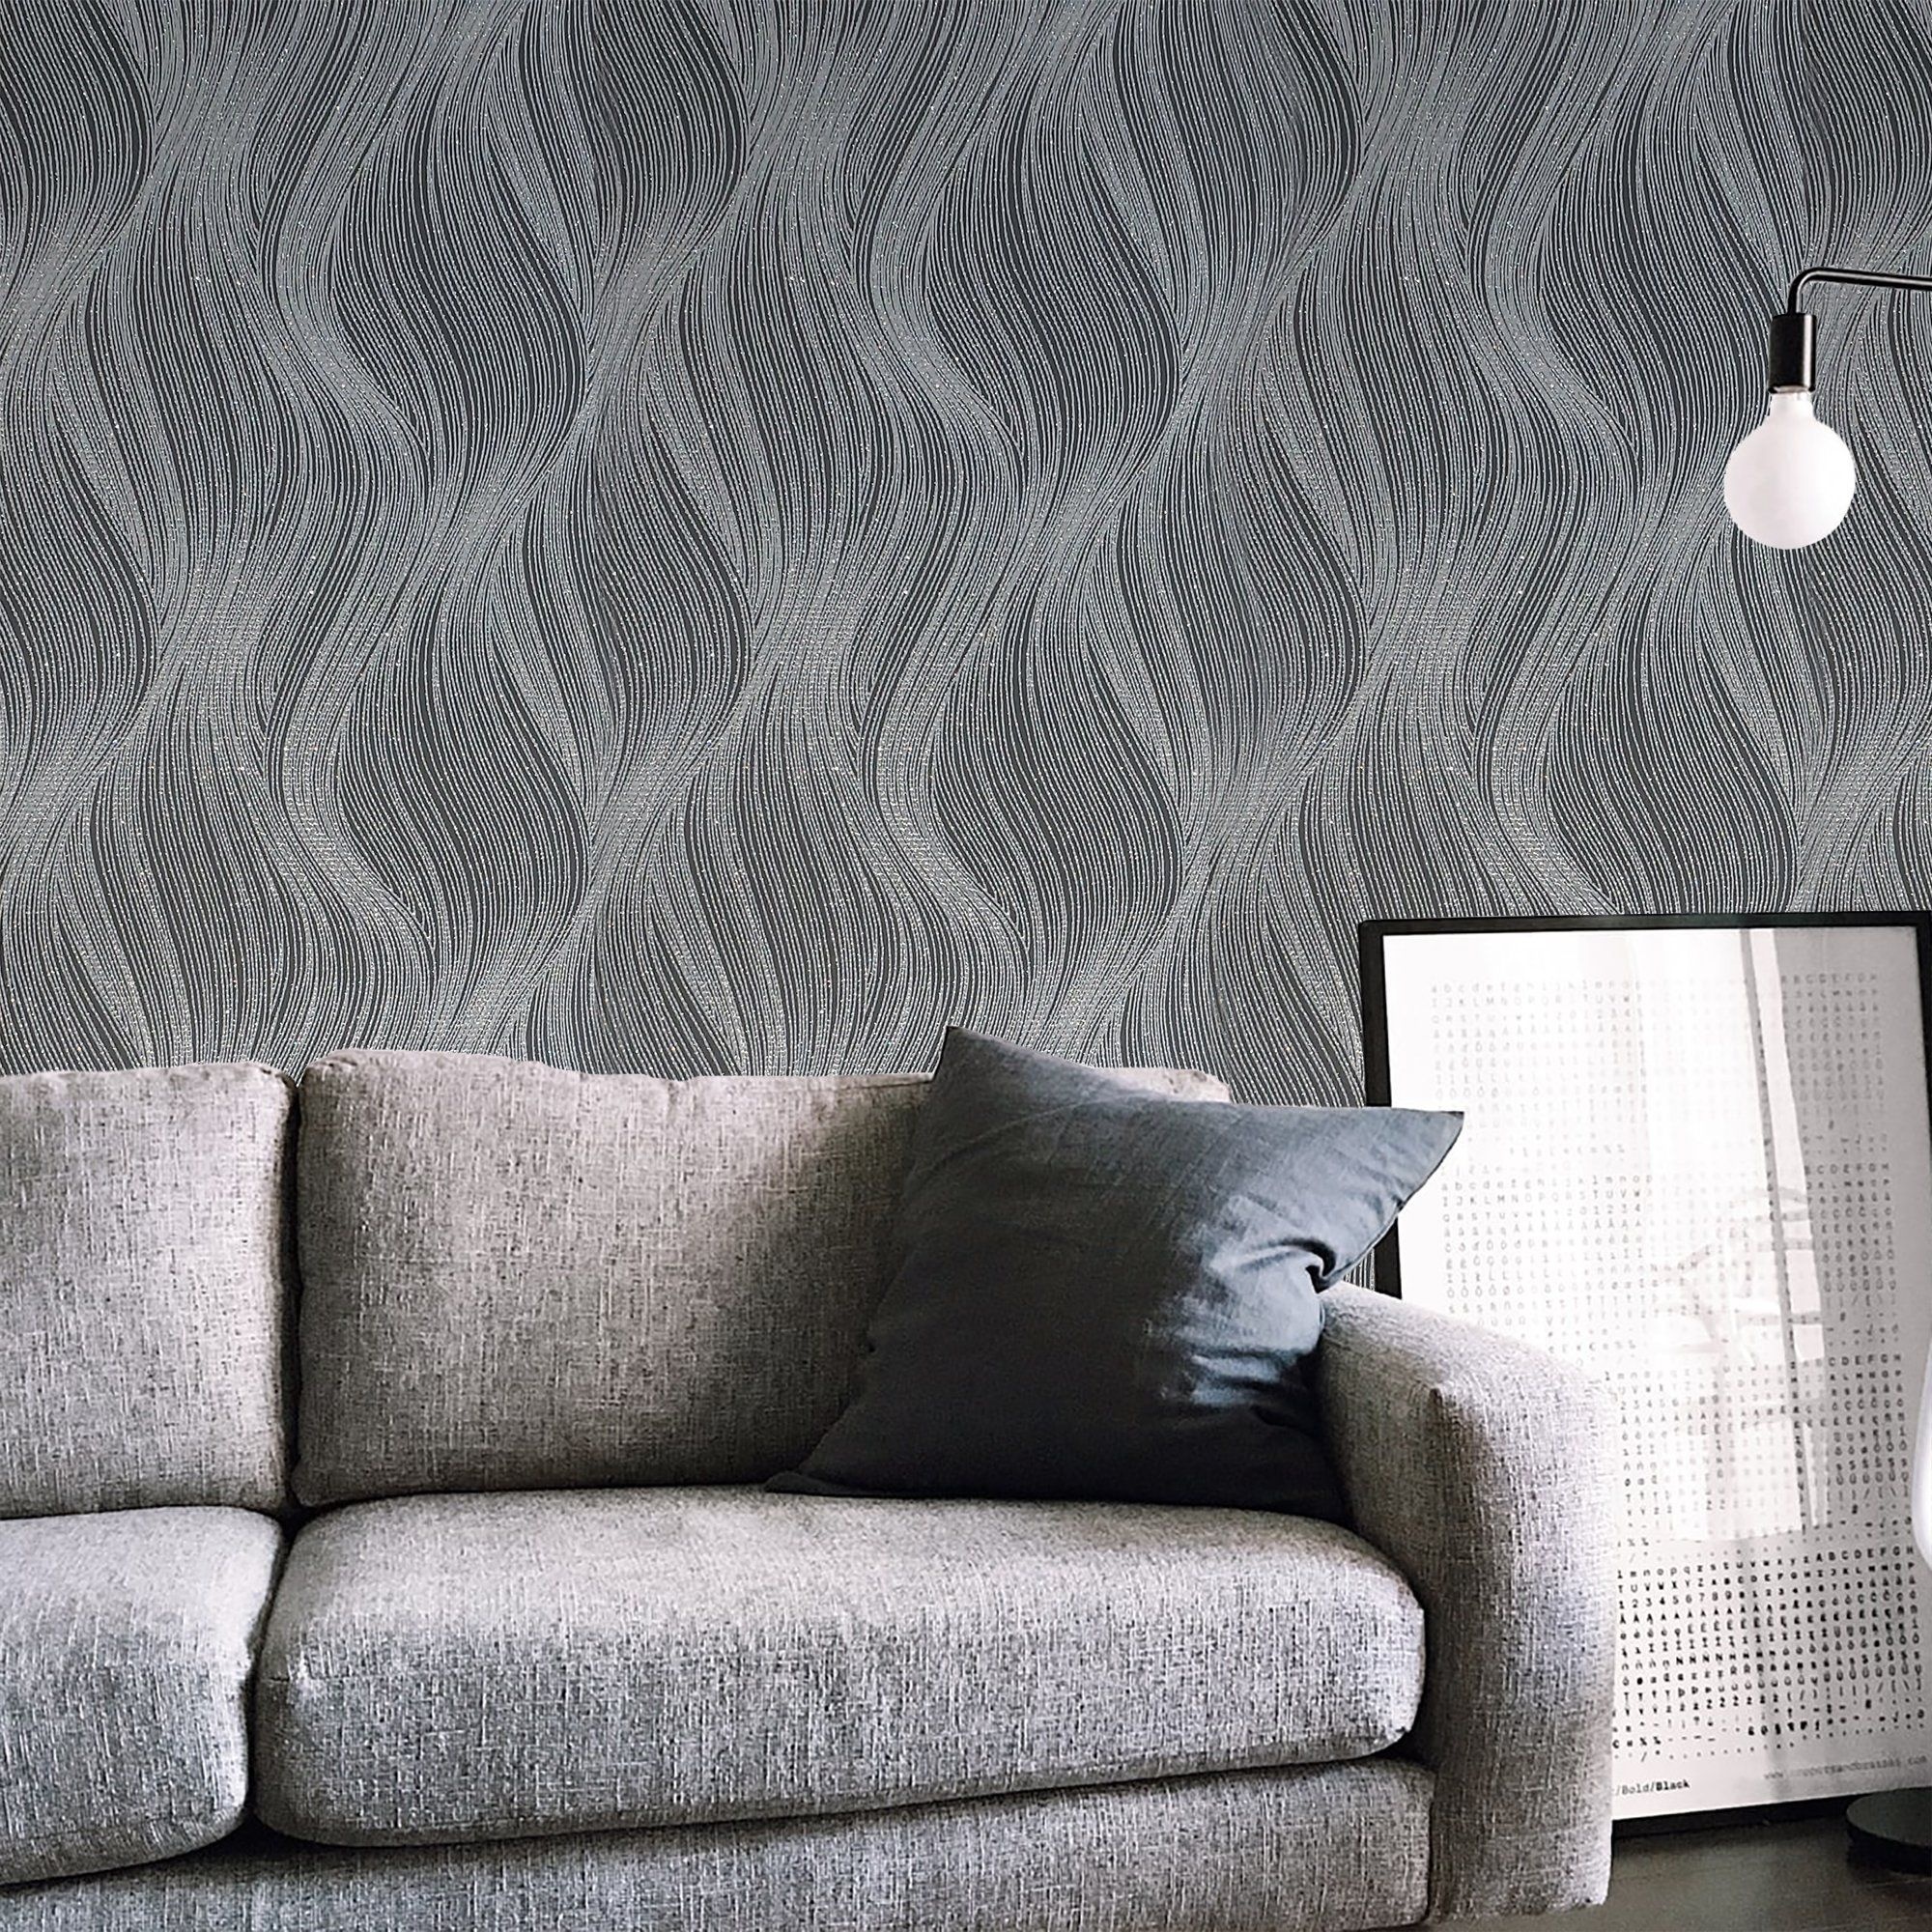 Gray Slate: Modern wall coverings, A stylish finishing touch, Deeper charcoal shades. 2000x2000 HD Wallpaper.